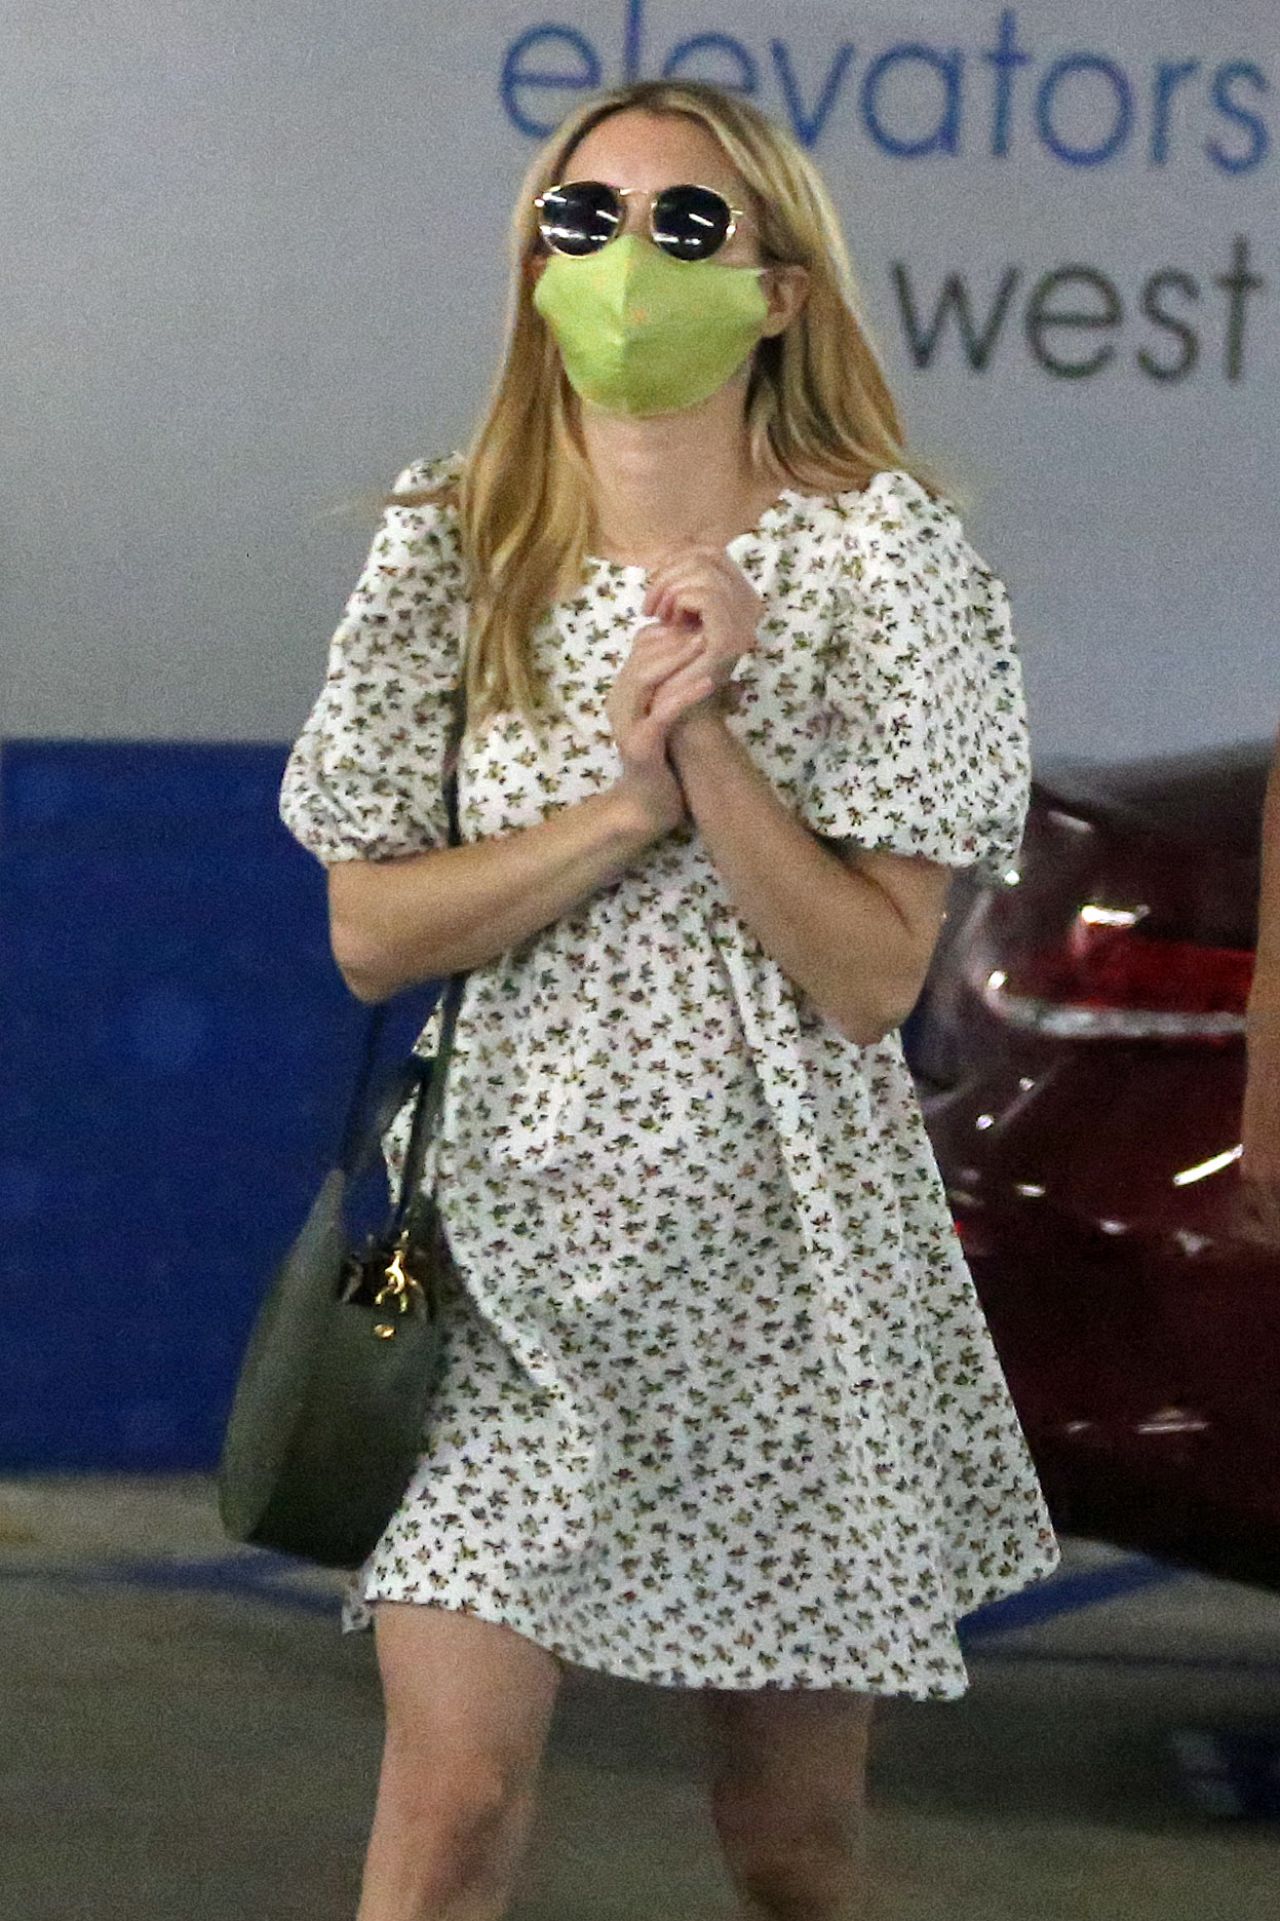 Emma Roberts arrives at LAX with personalised Louis Vuitton luggage